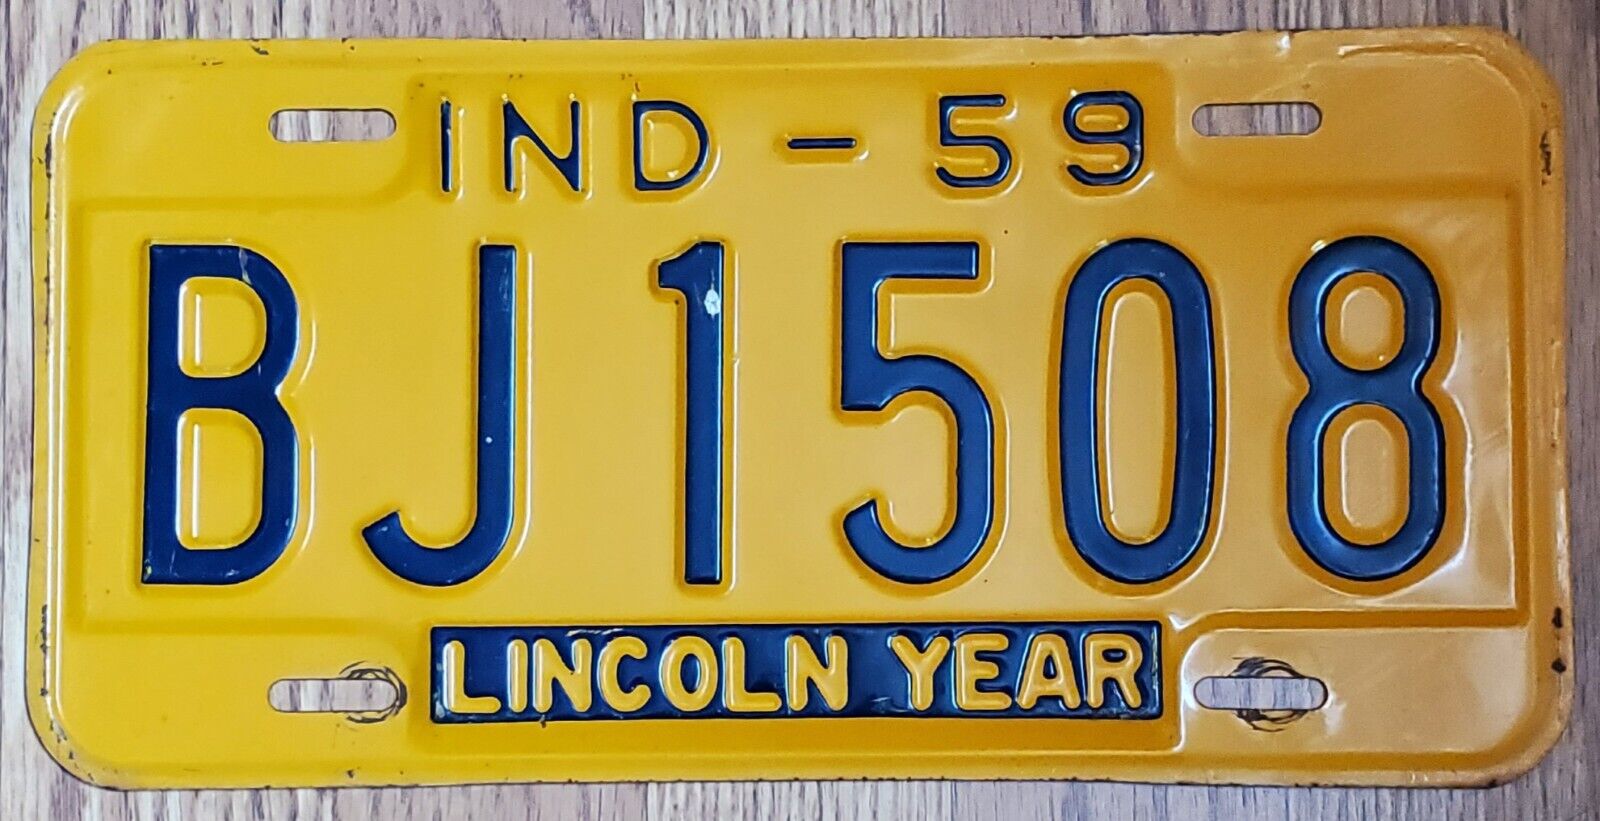 1959 INDIANA IN LICENSE PLATE TAG # “BJ1508” - LINCOLN YEAR; ANTIQUE Vintage